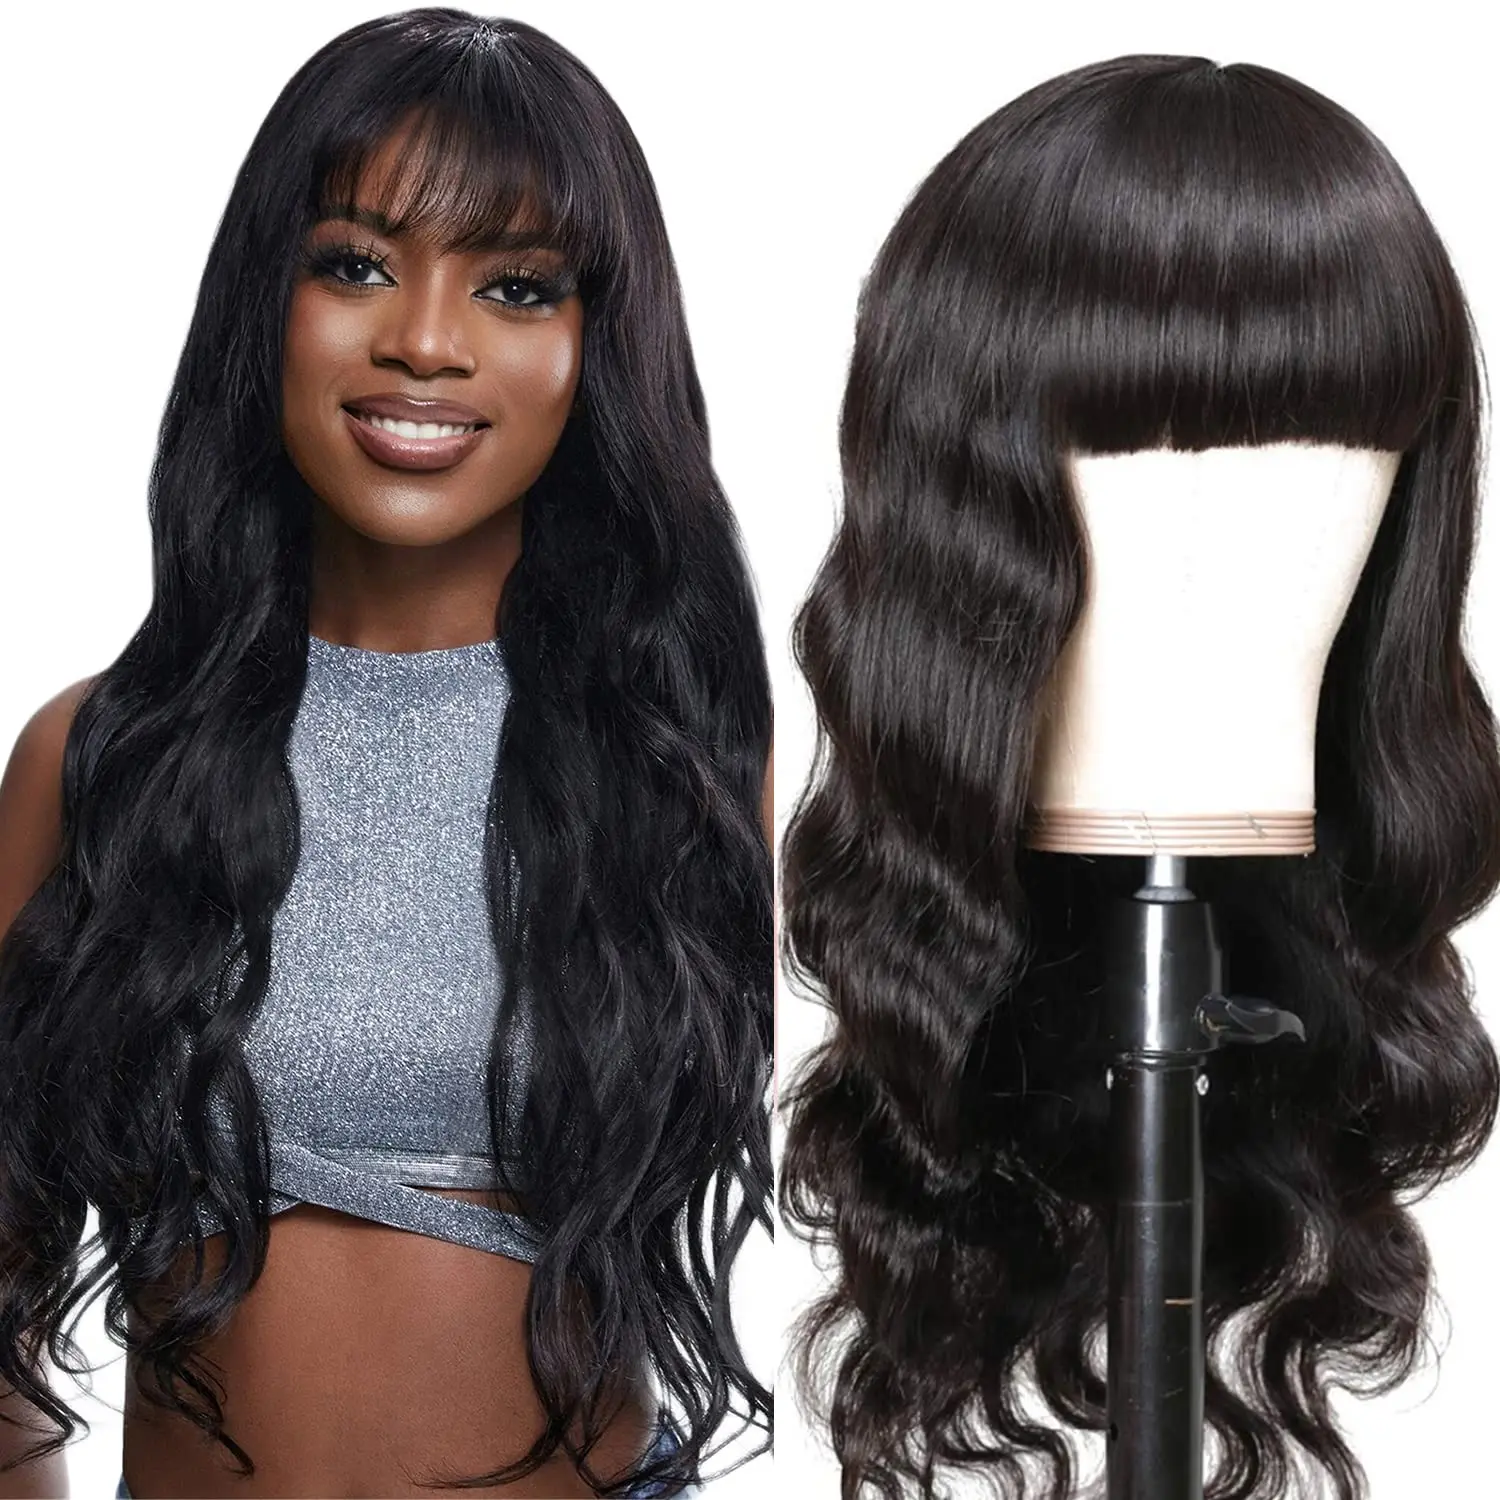 

Full Machine Made Body Wave Wig With Bangs 30 inch Human Hair Wig Fringe Wigs 180 Density Brazilian Remy Hair Glueless Wig